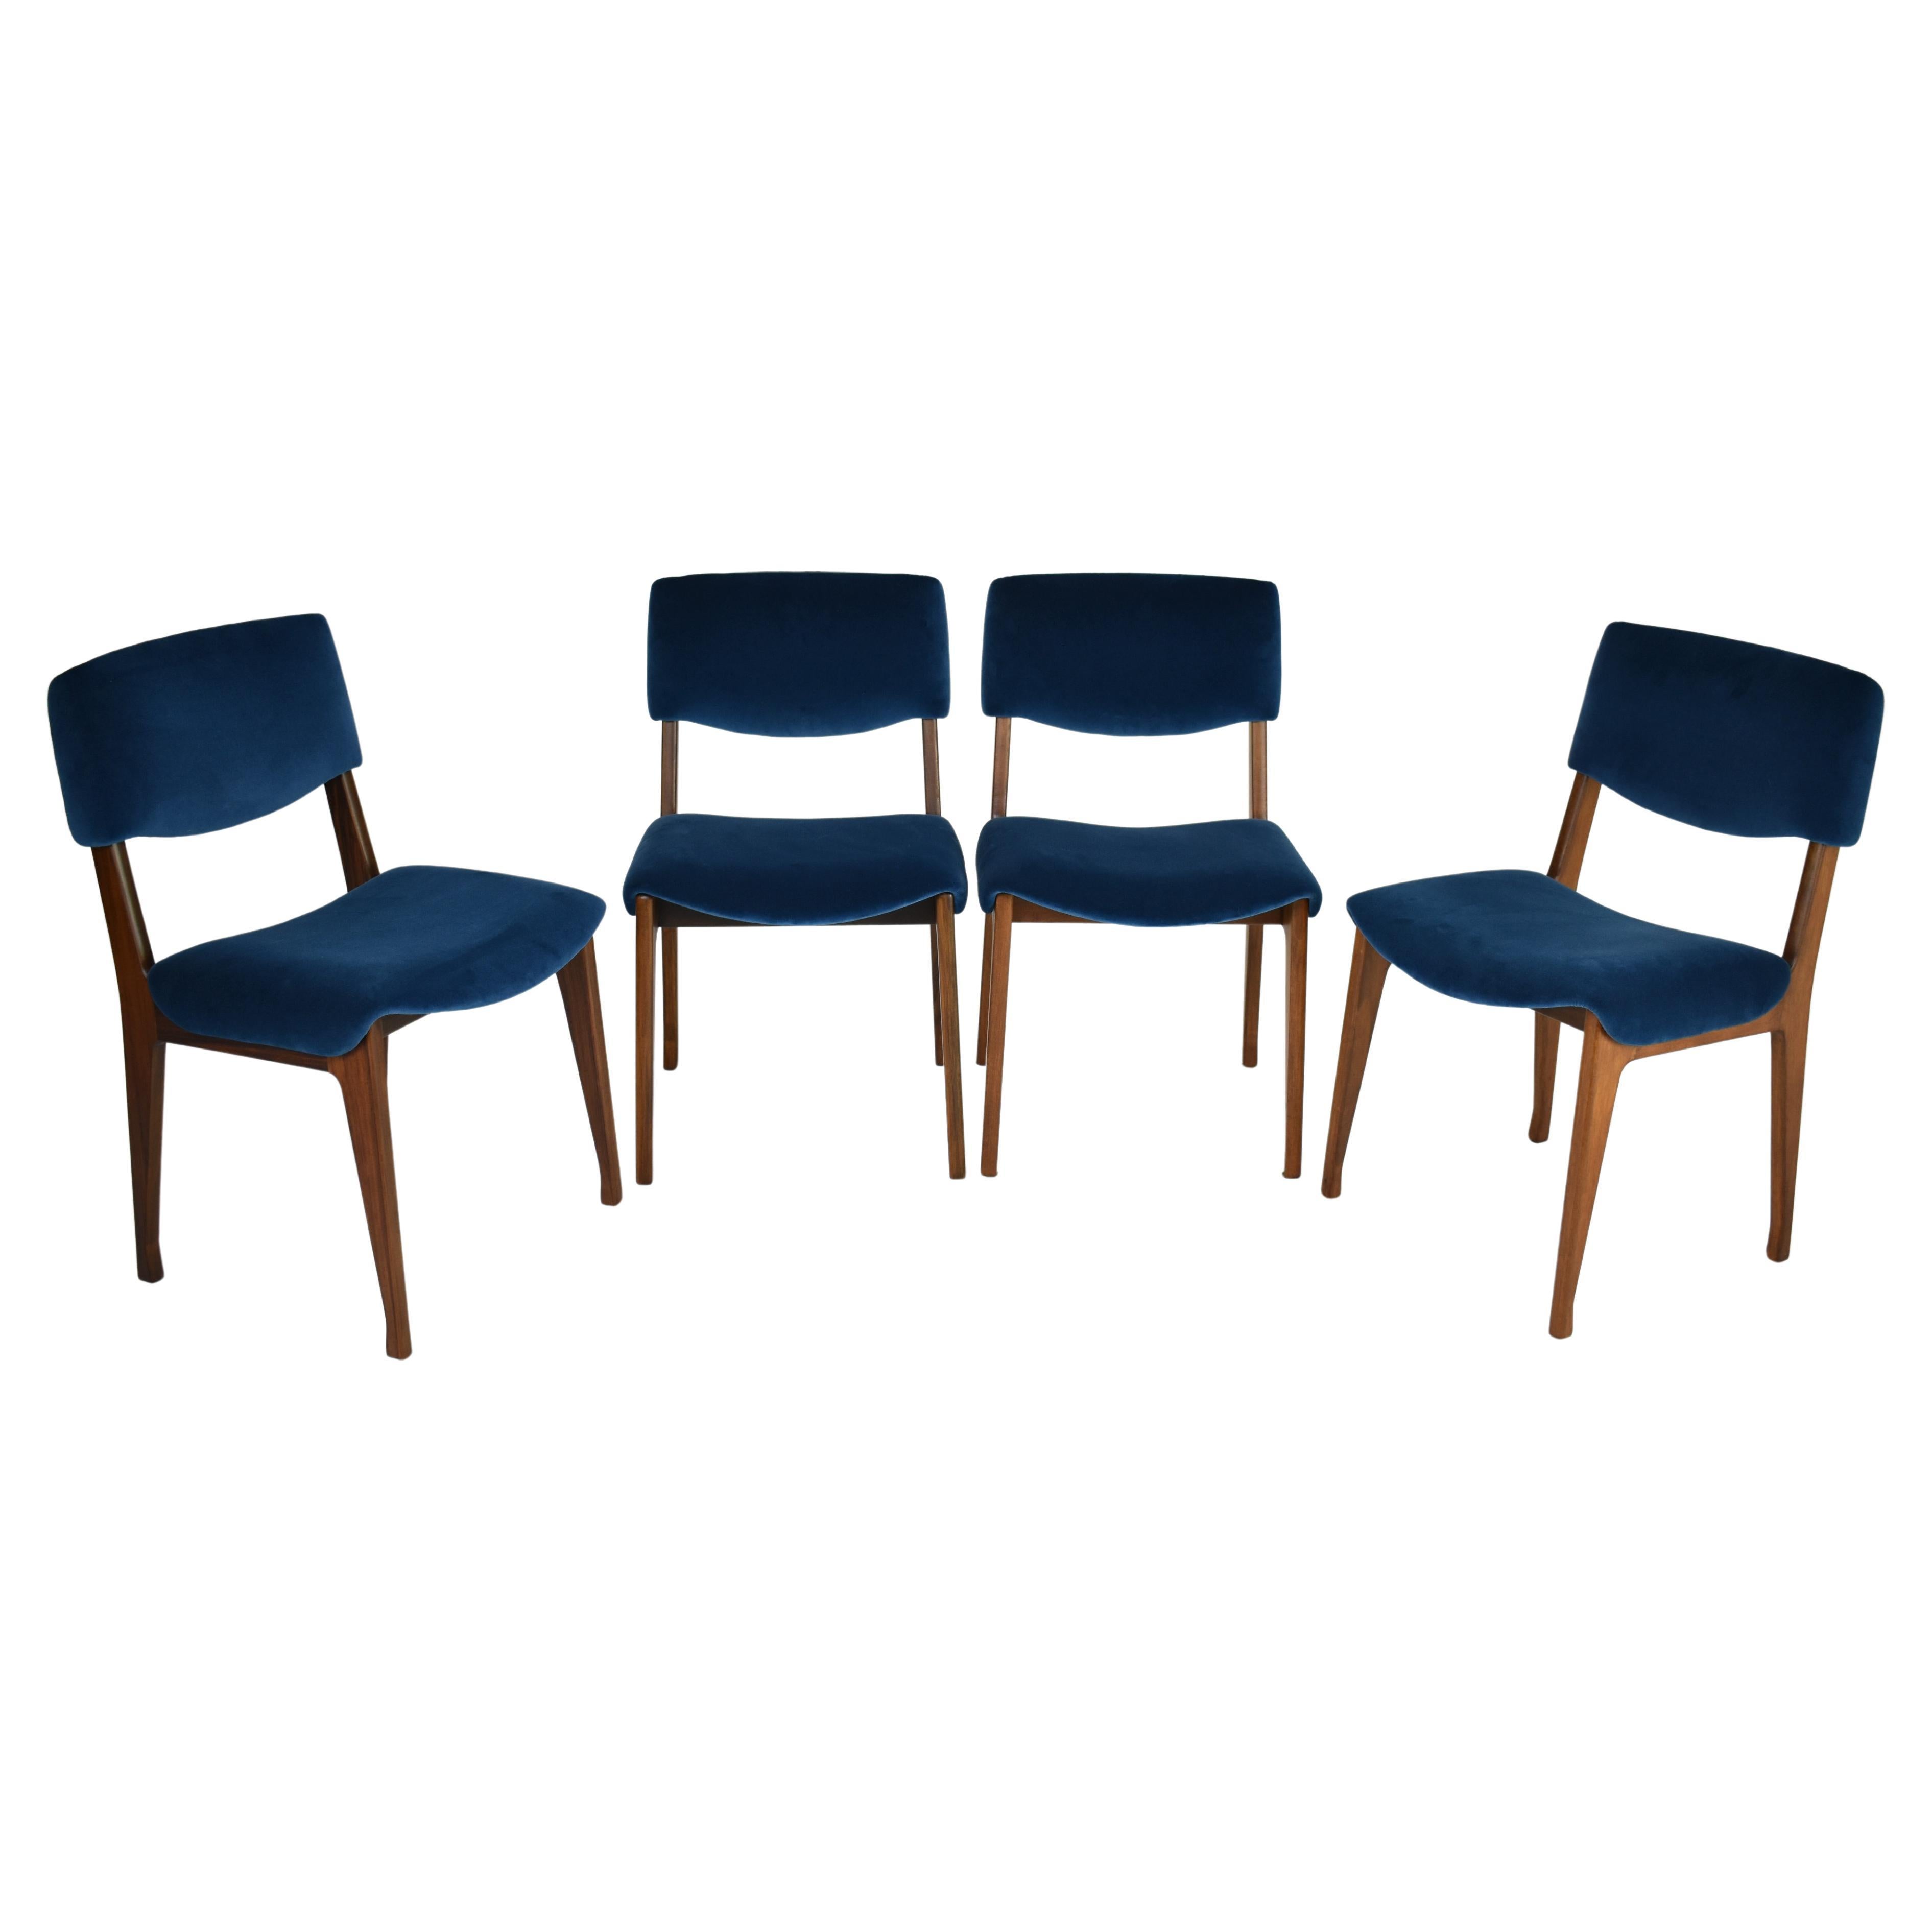 Italian Ico Parisi Wooden Dining Chairs, Set of Four, 1950s-60s For Sale